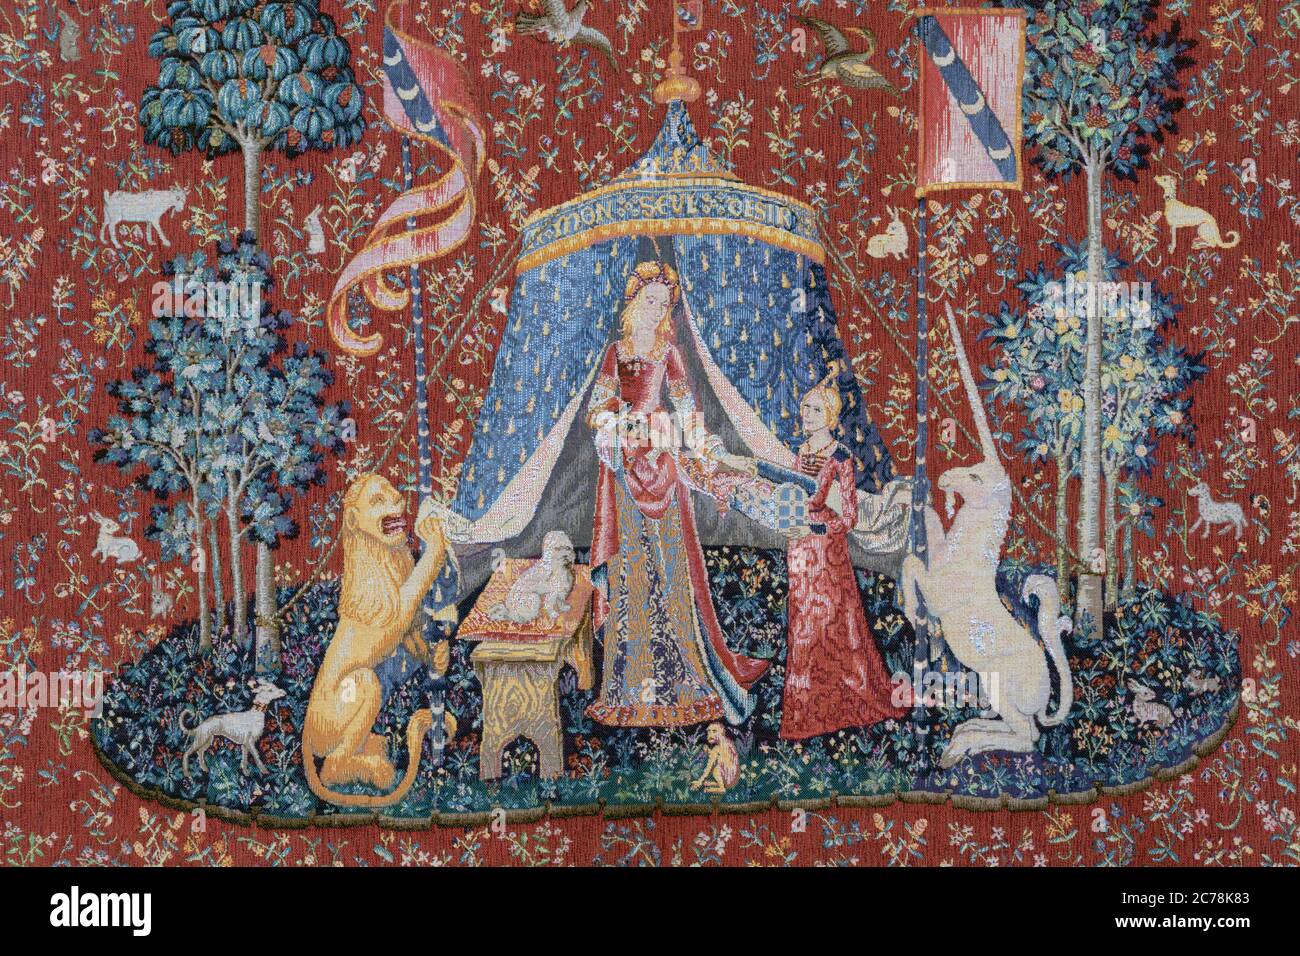 Detail of À Mon Seul Désir tapestry, the sixth in the La Dame à la licorne, or The Lady and the Unicorn series of tapestries. Stock Photo